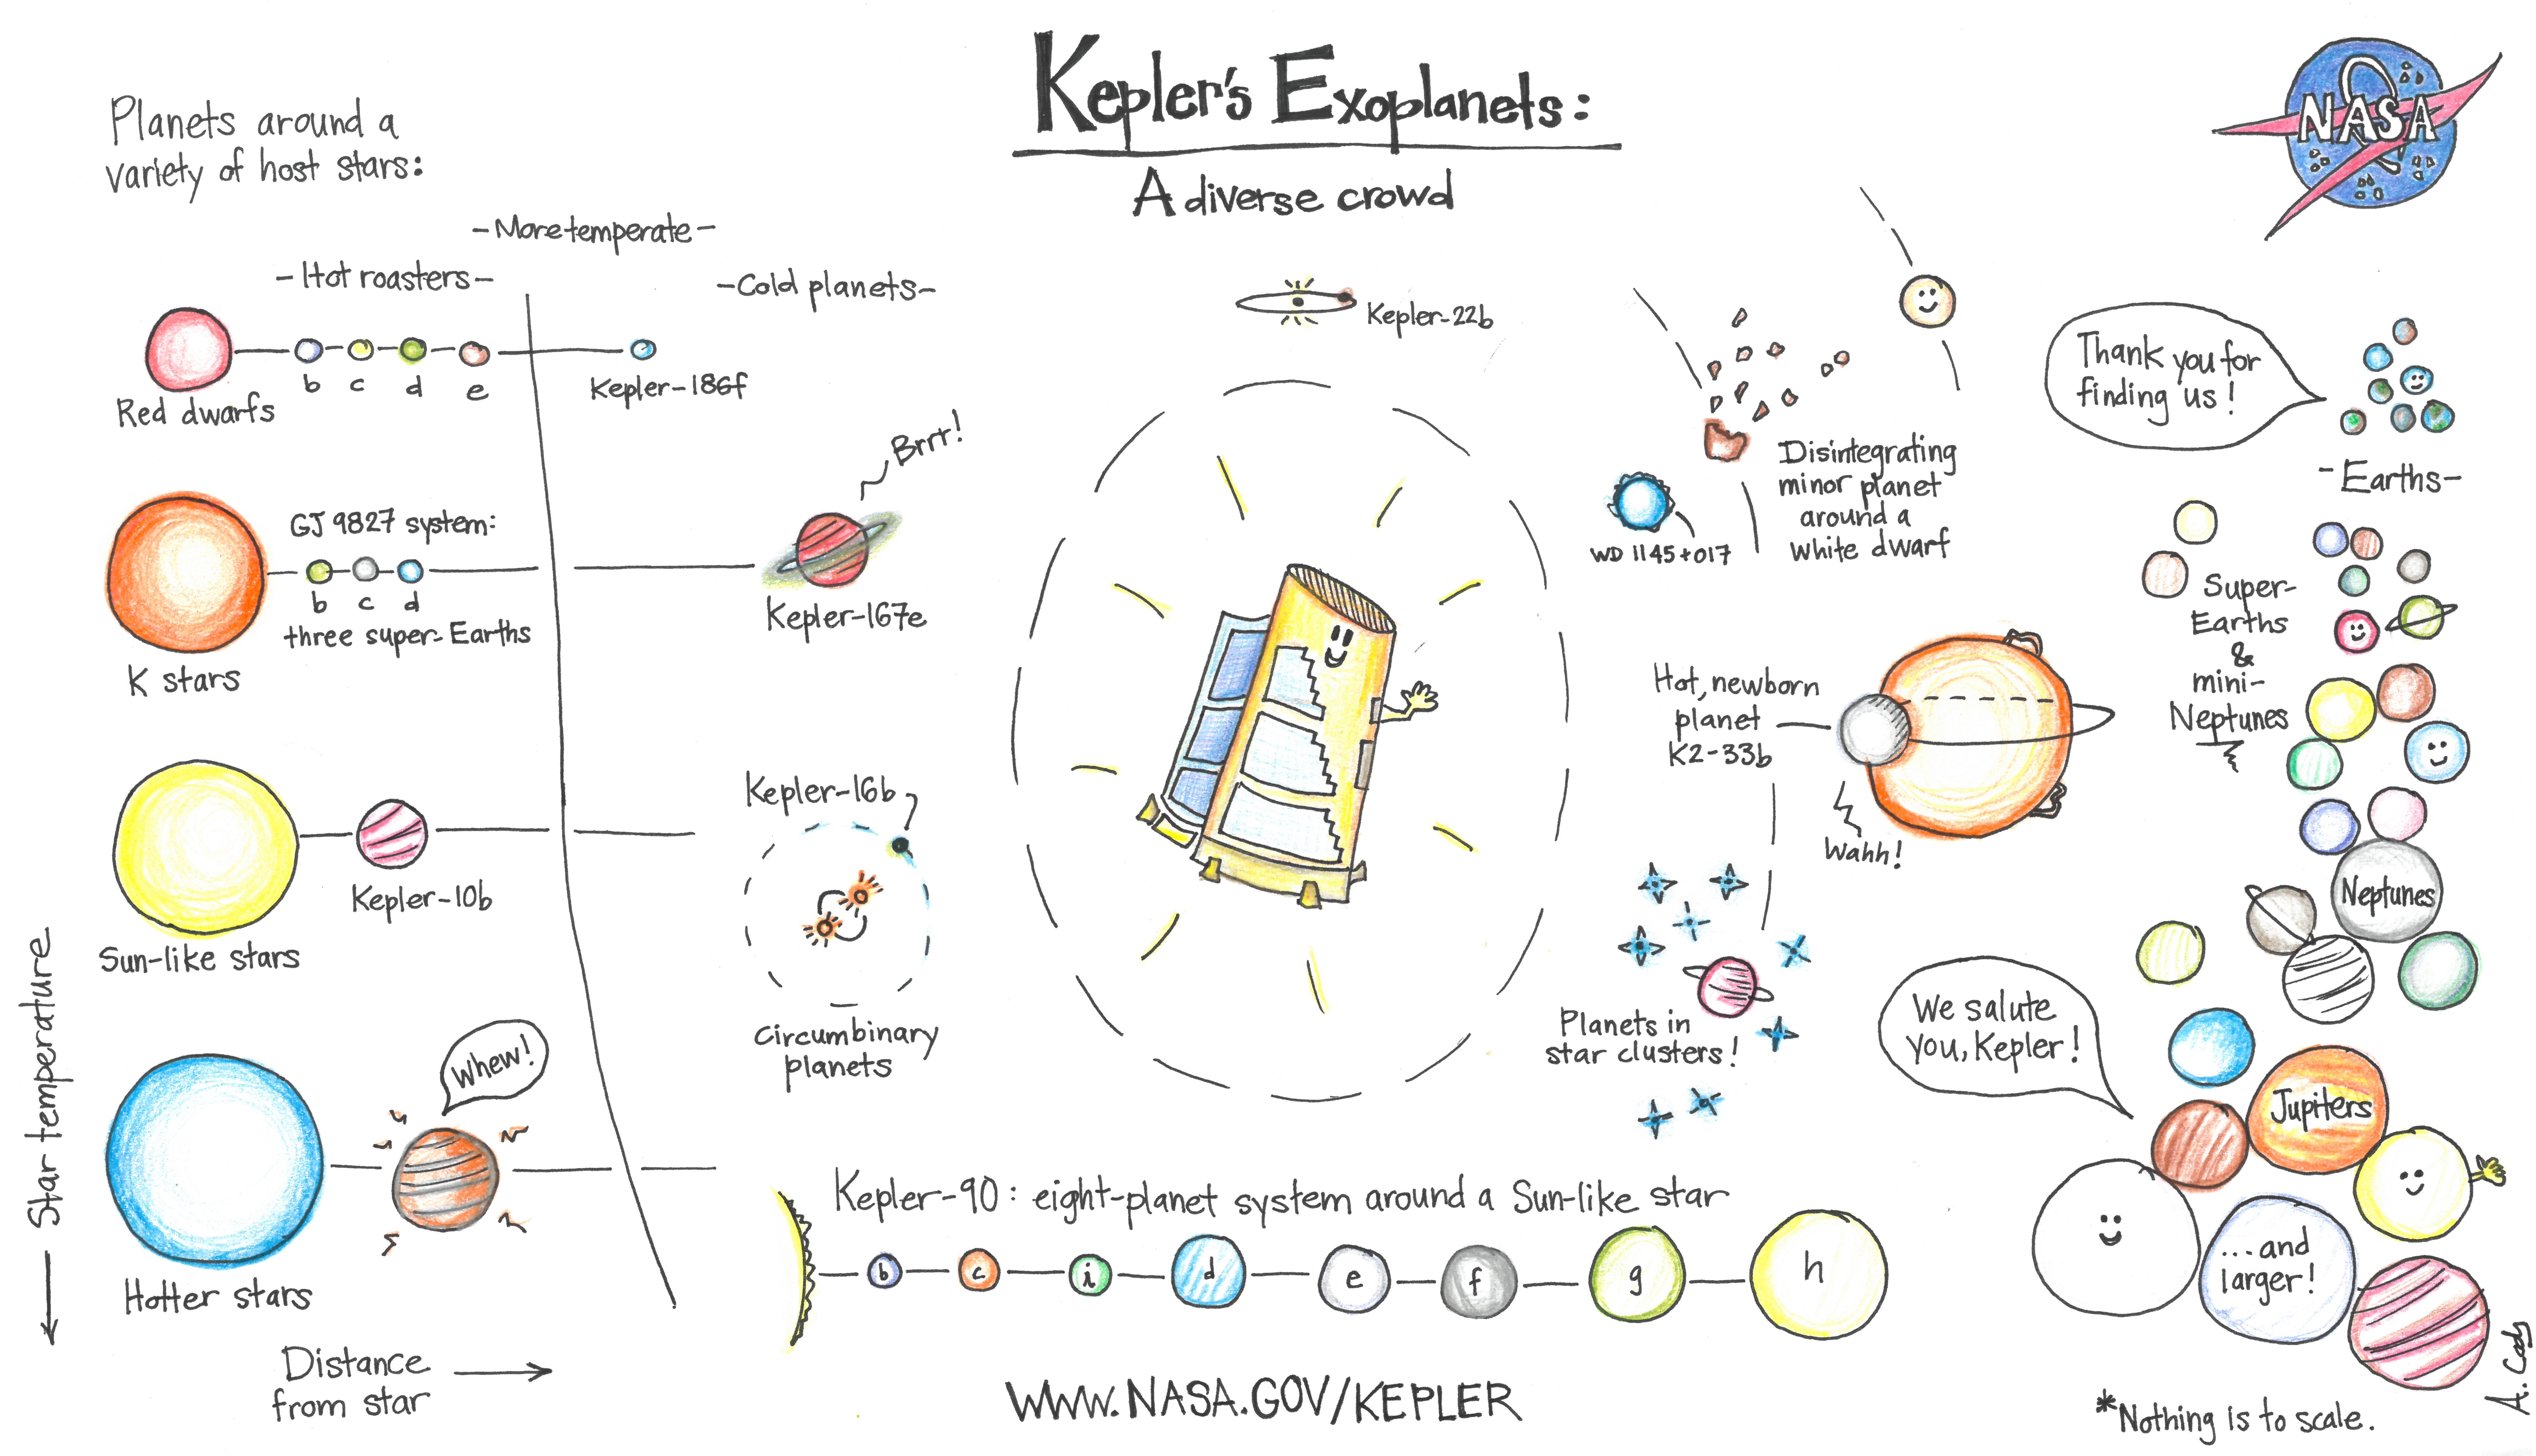 Cartoon of NASA's Kepler spacecraft and its discoveries.